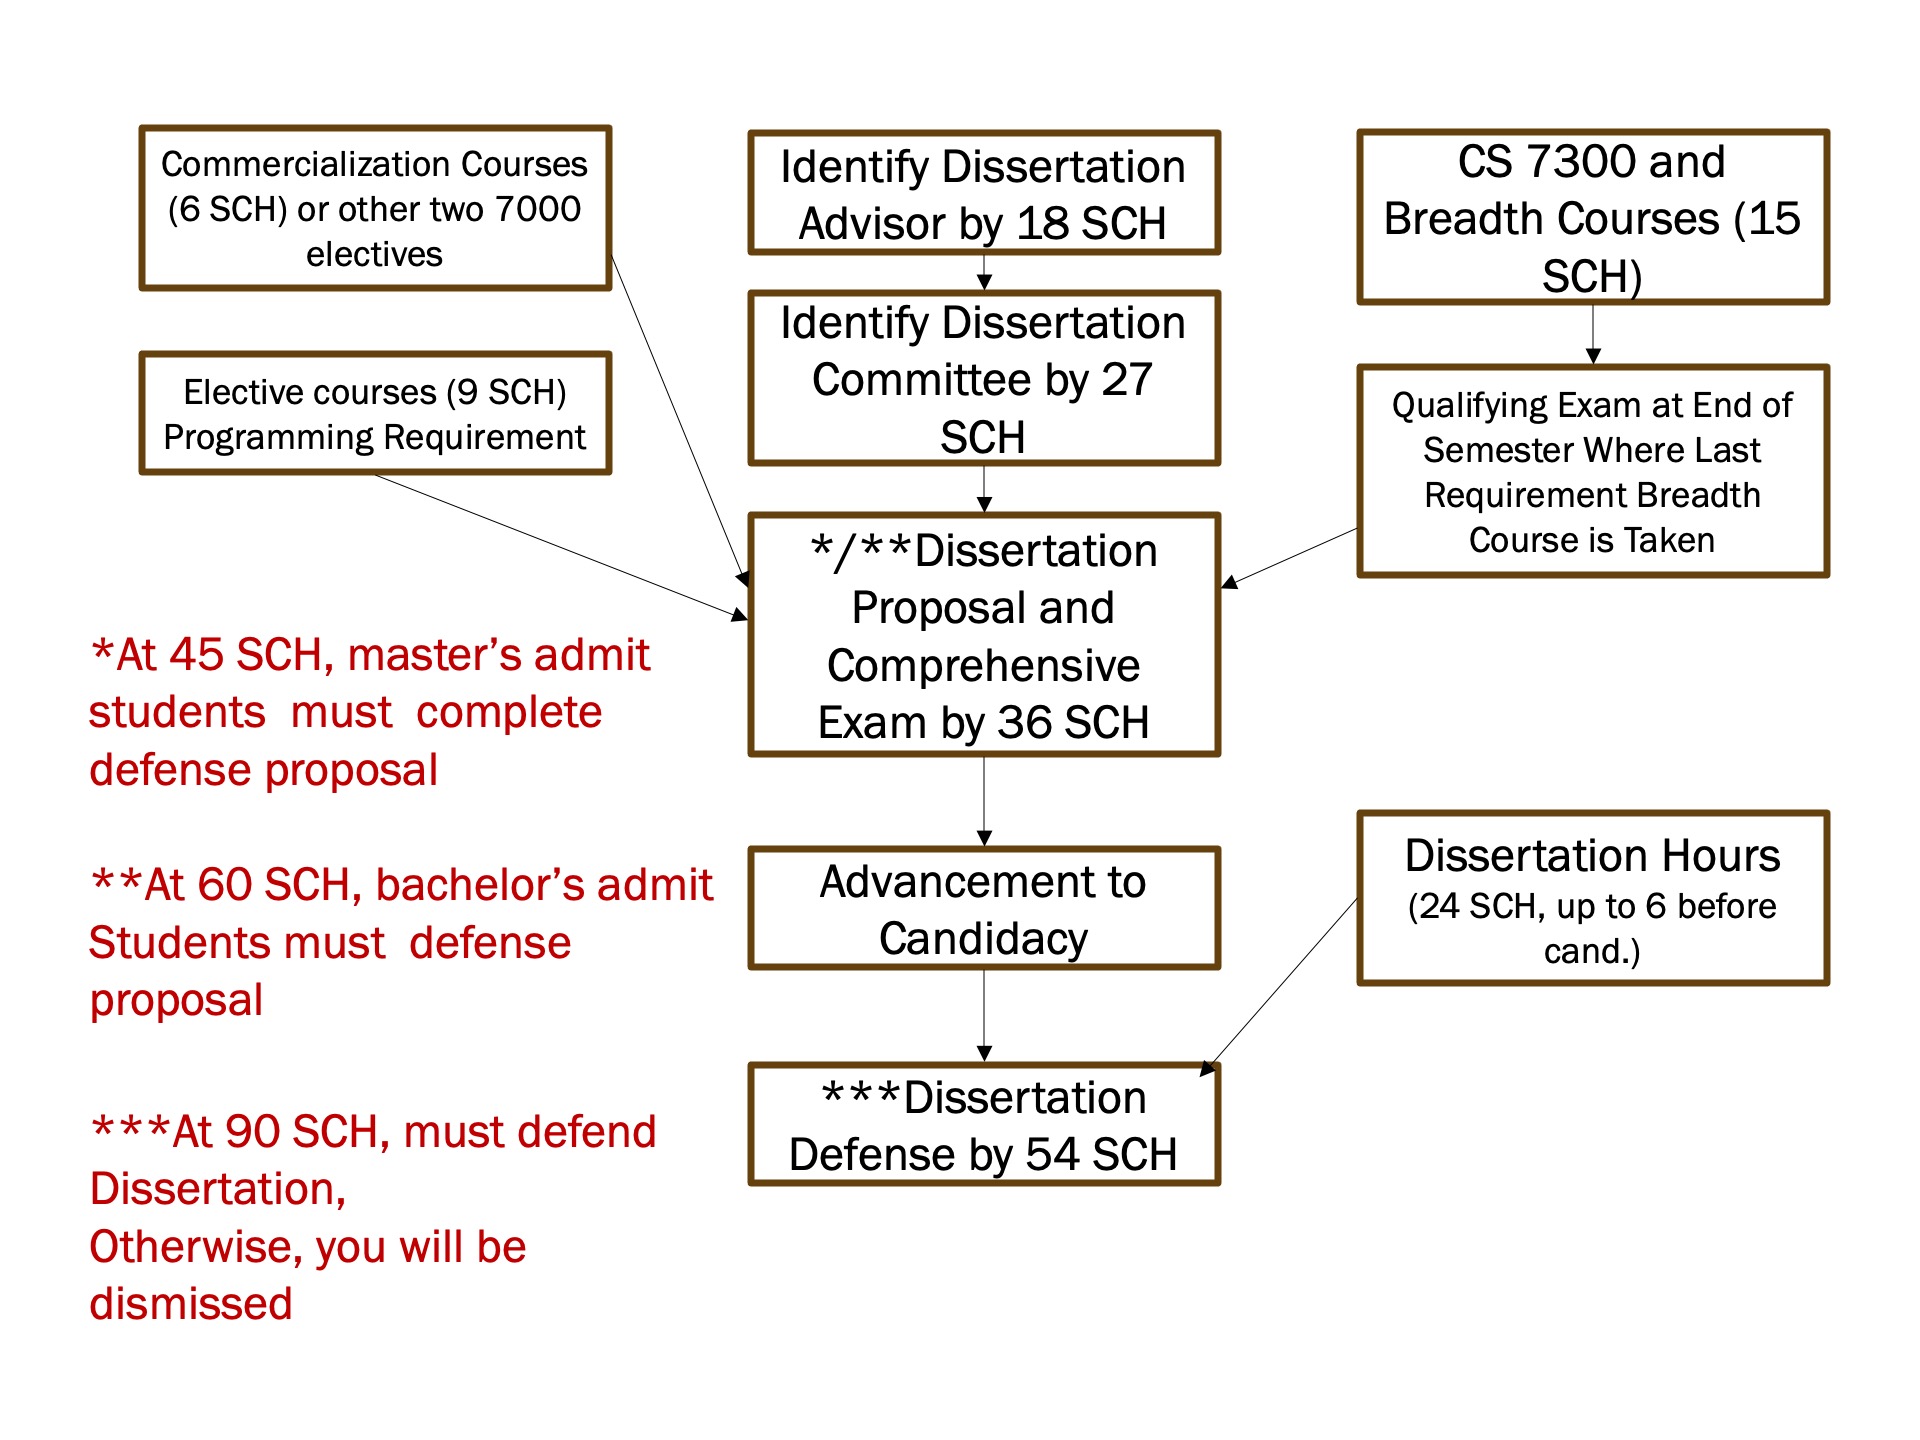 A flowchart describes the requirements, and their dependencies, for acceptance into the doctoral program. A list follows the chart to restate it in accessible format.